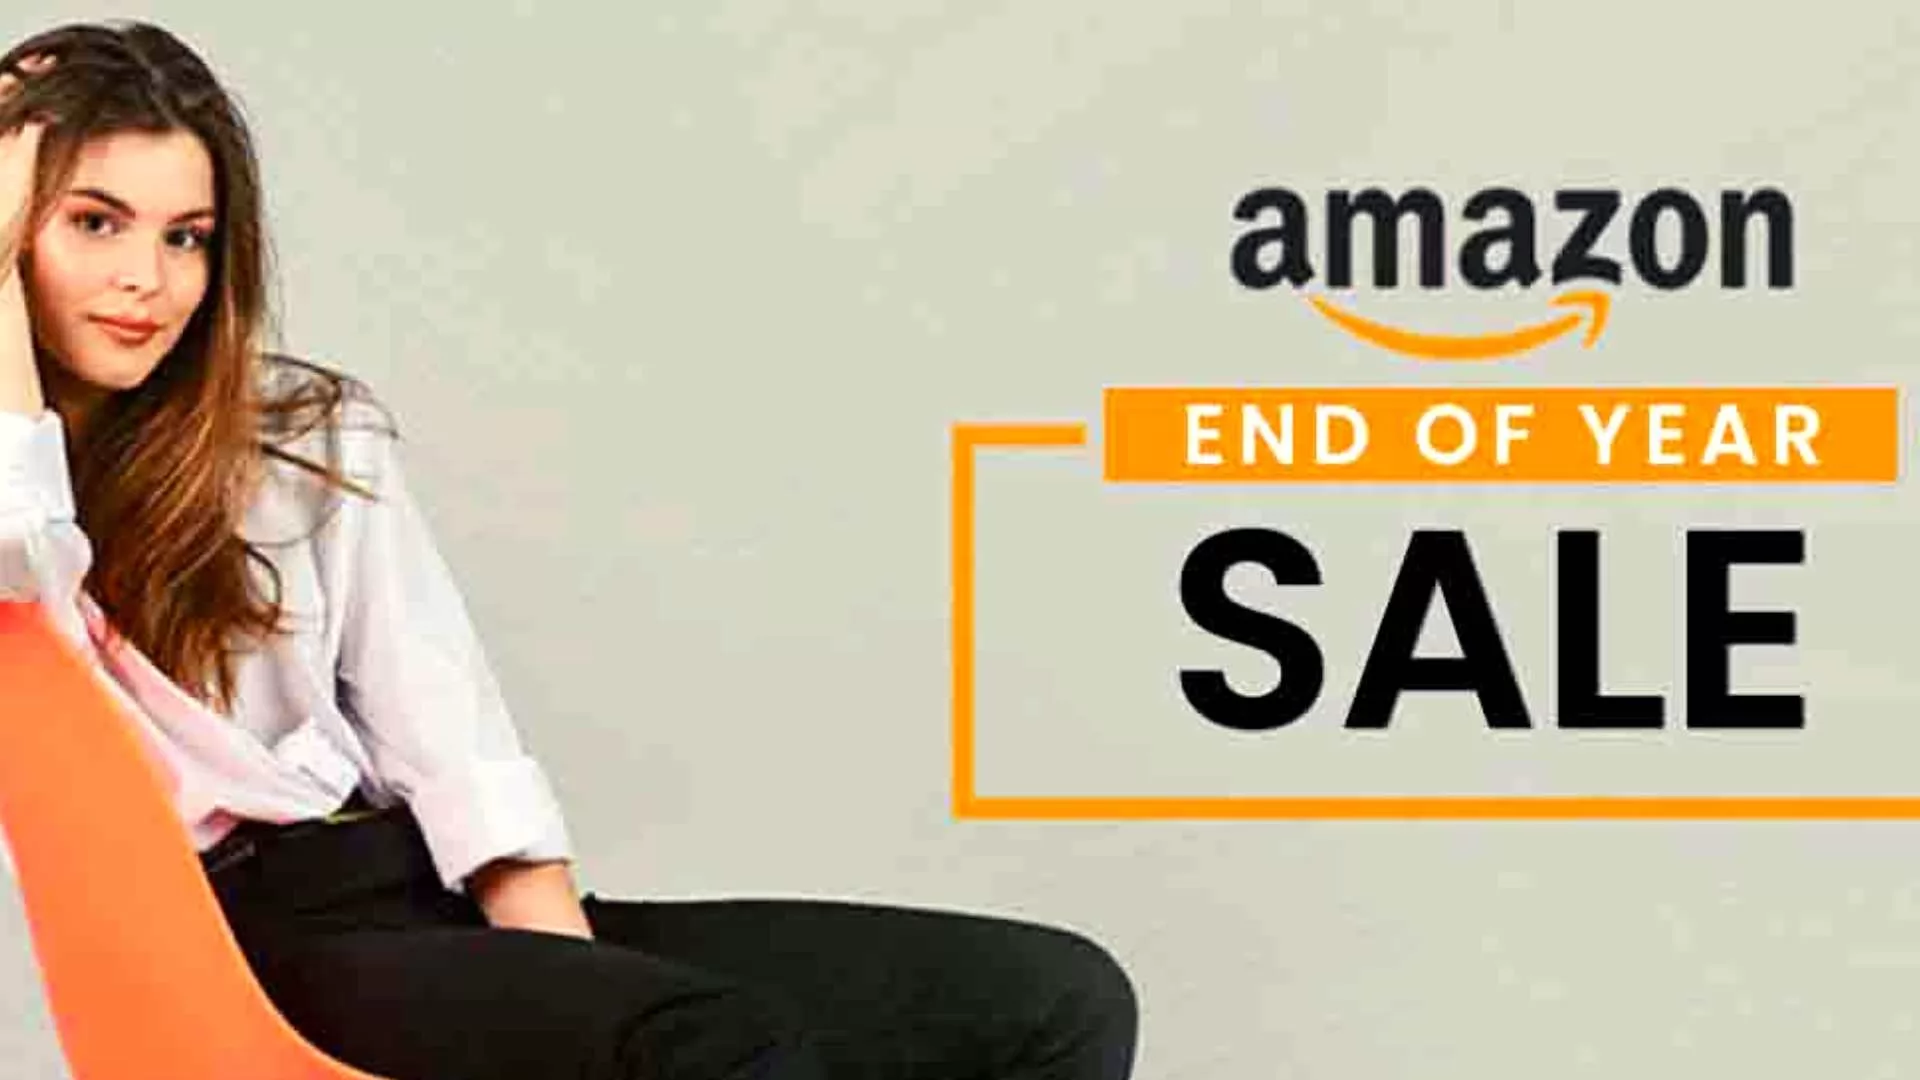  Amazon End-Of-The-Year Sale